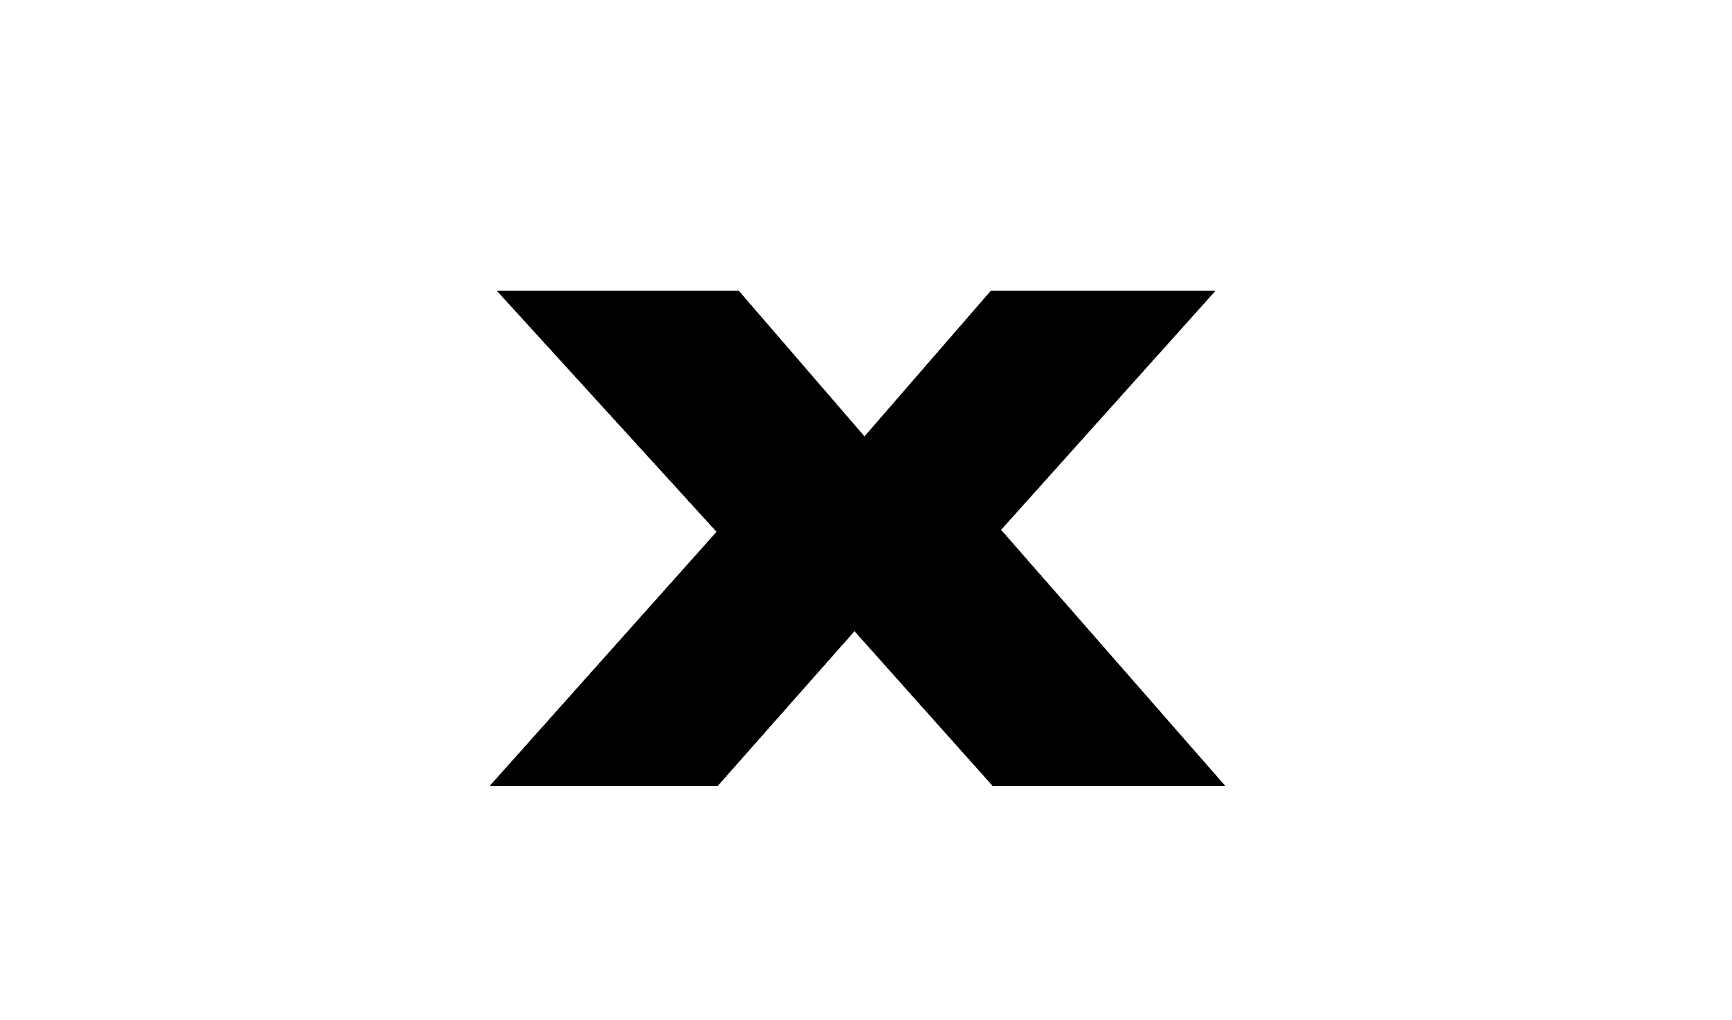 Boys & Girls Clubs of Monmouth County Hustle for Healing Logo